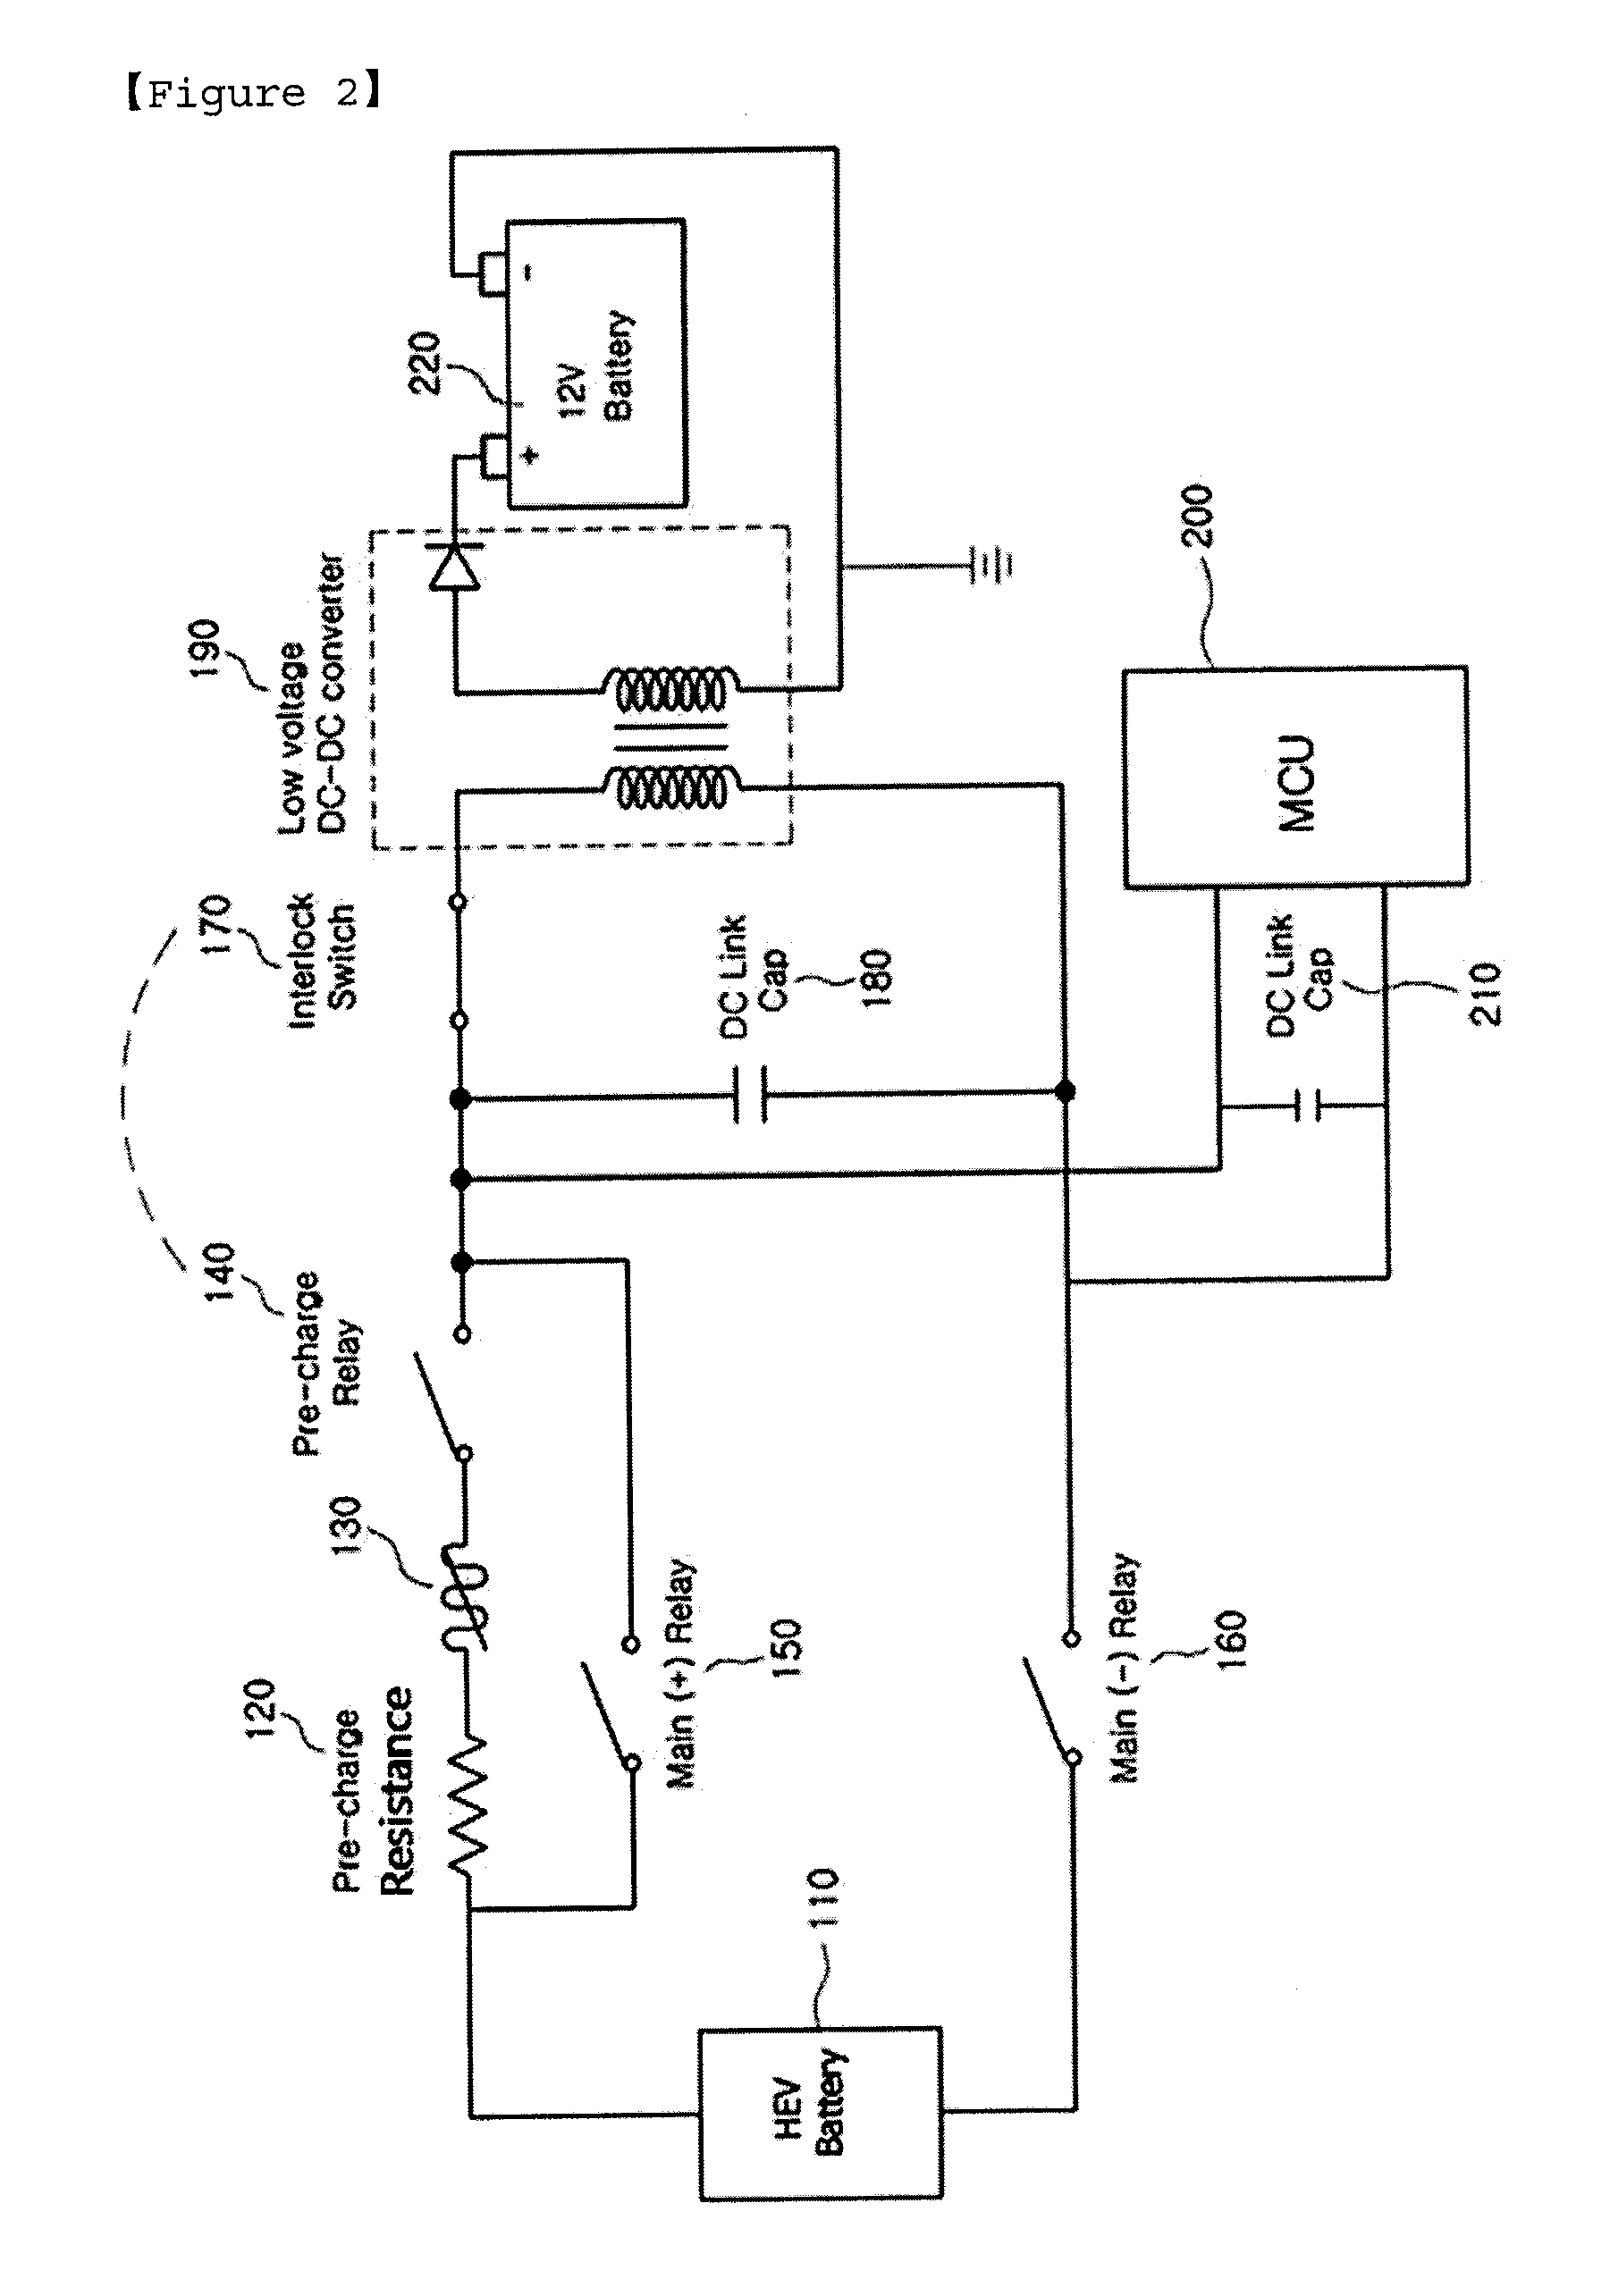 Circuit Apparatus for Protecting a Pre-Charge Resistance Using an Interlock Switch